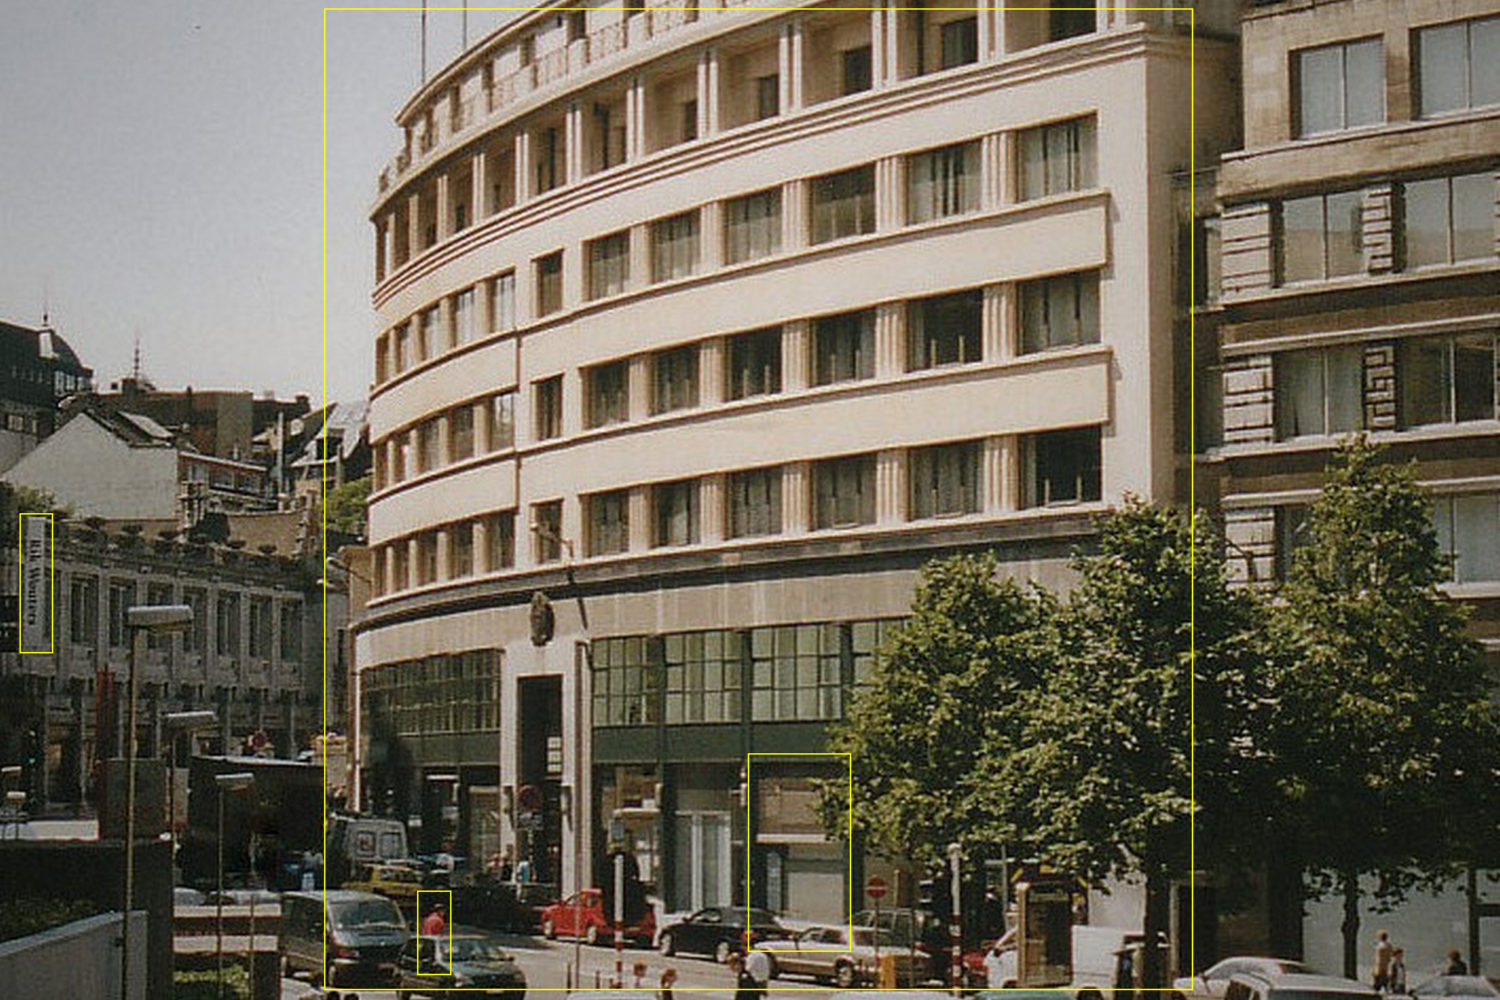 A view from Bidules Rue Ravenstein Bruxelles in the eighties, before it became a glasses store